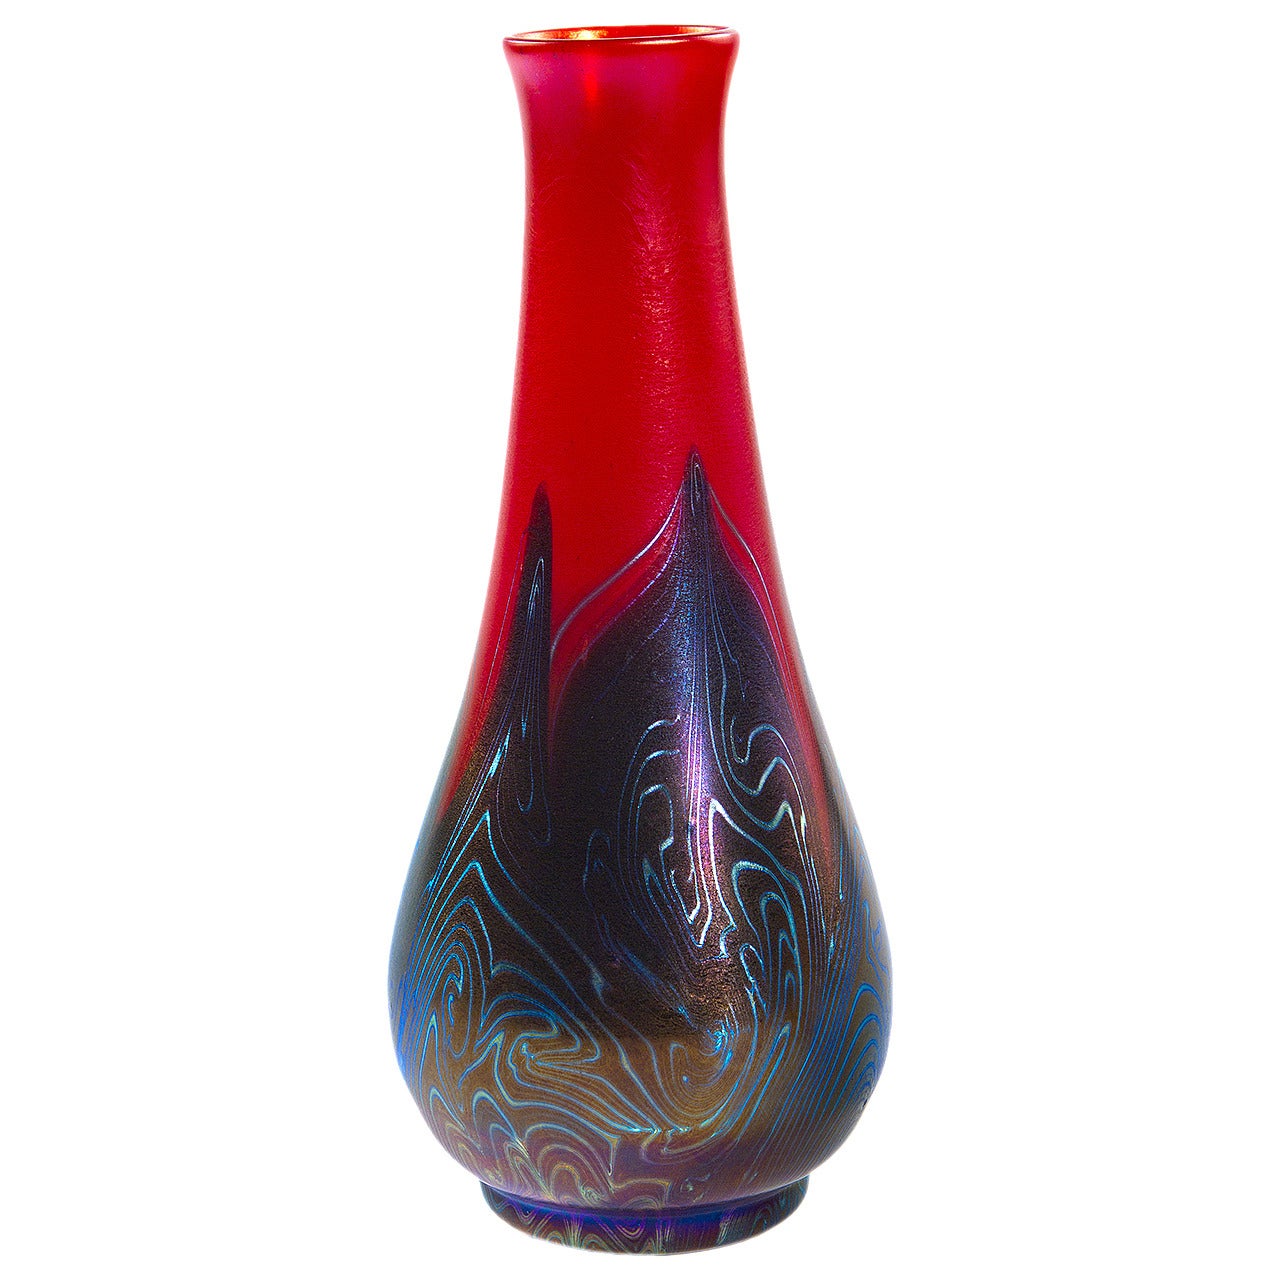 Tiffany Favrile "Red Decorated" Vase